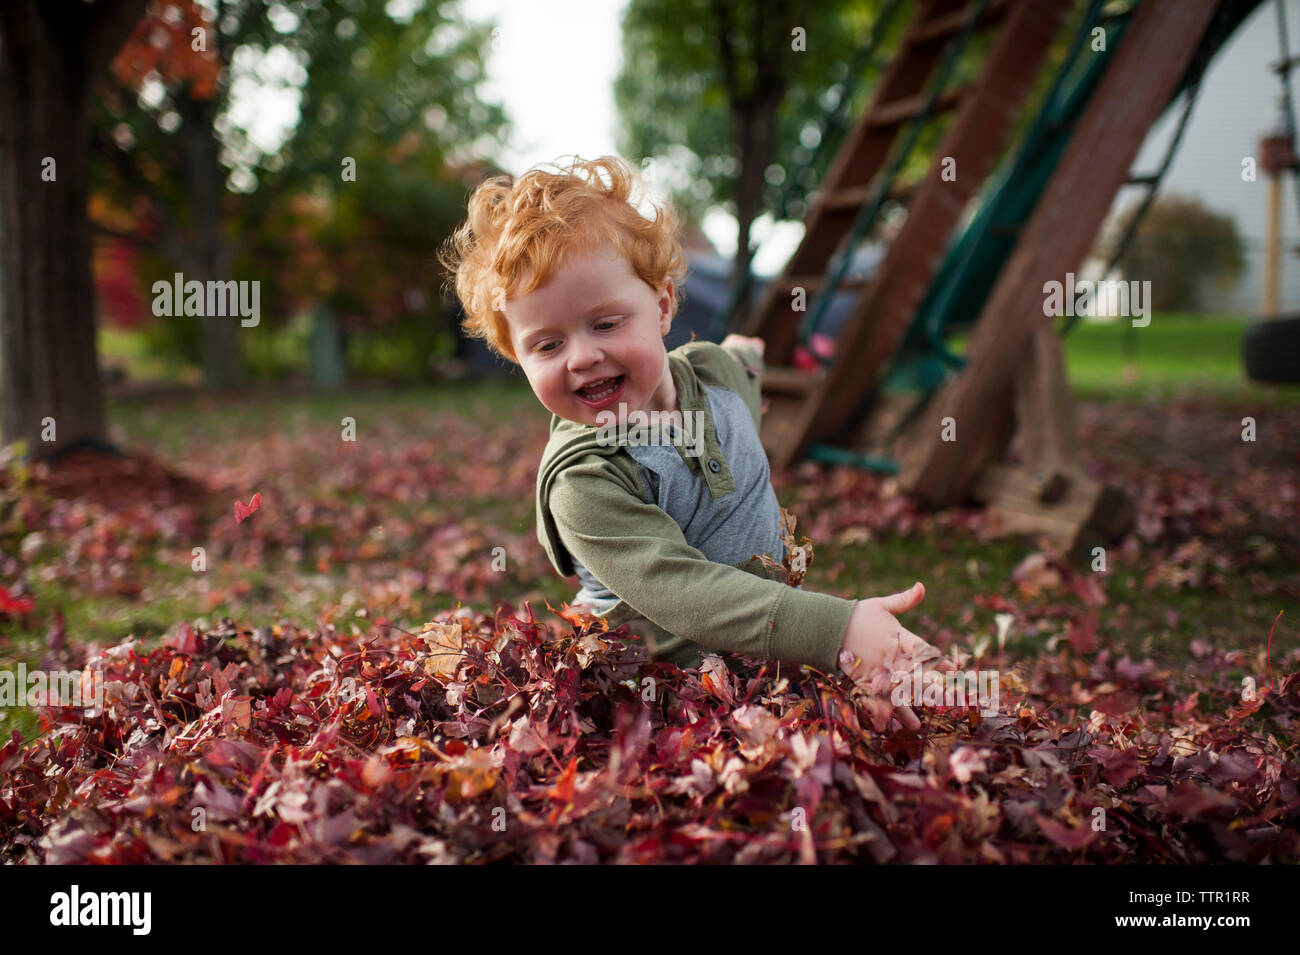 Joyful toddler boy plays in pile of leaves in backyard at home Stock Photo